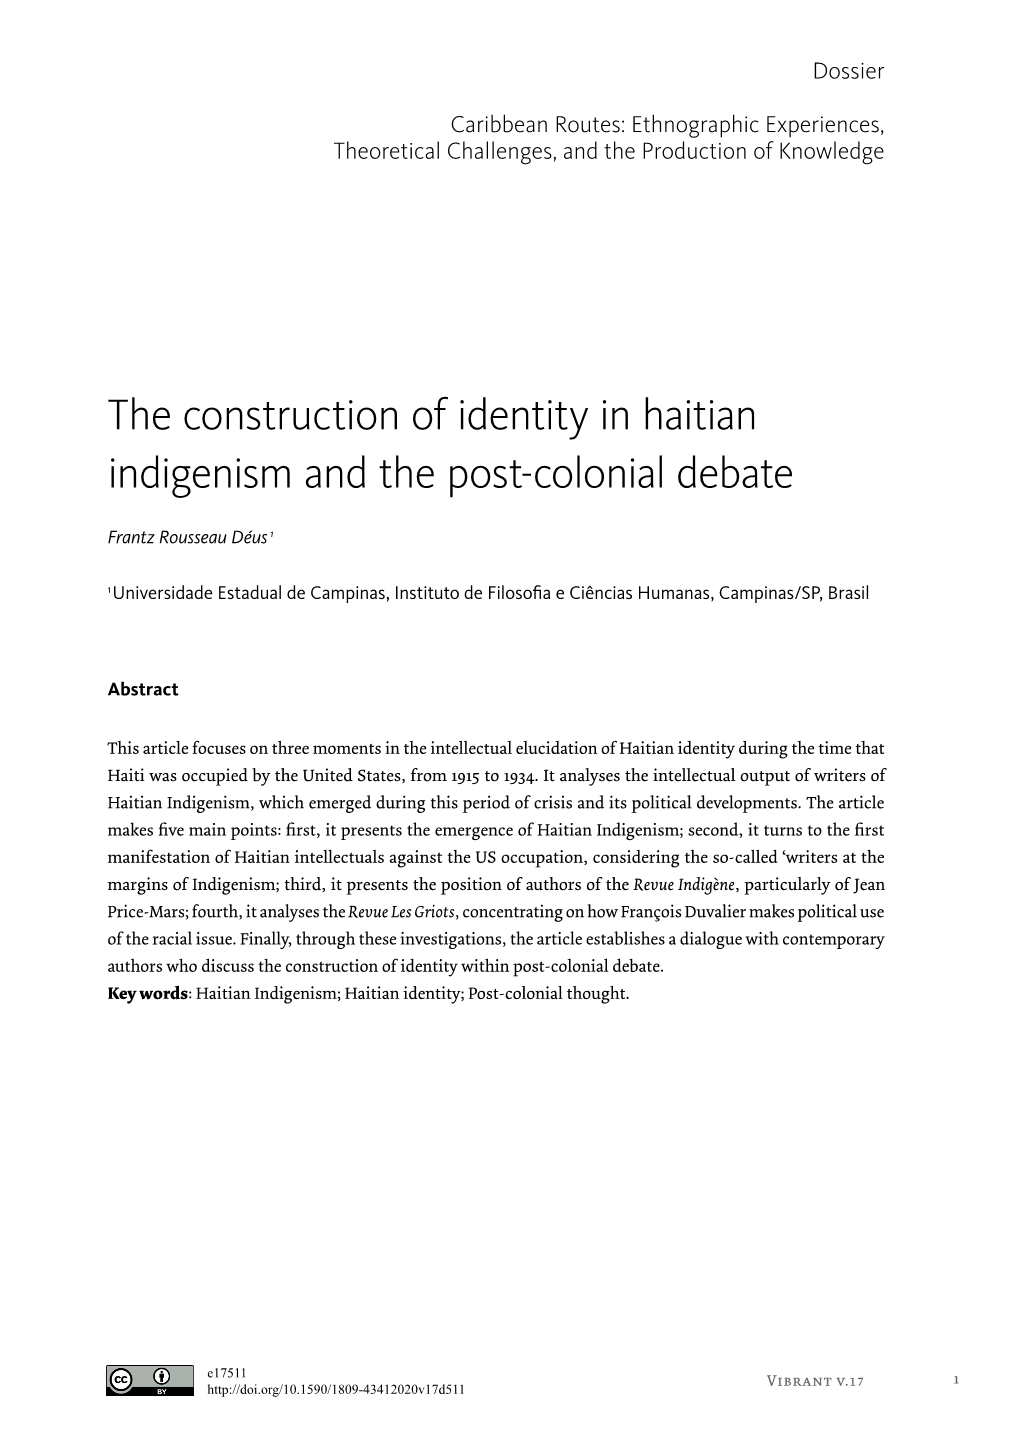 The Construction of Identity in Haitian Indigenism and the Post-Colonial Debate